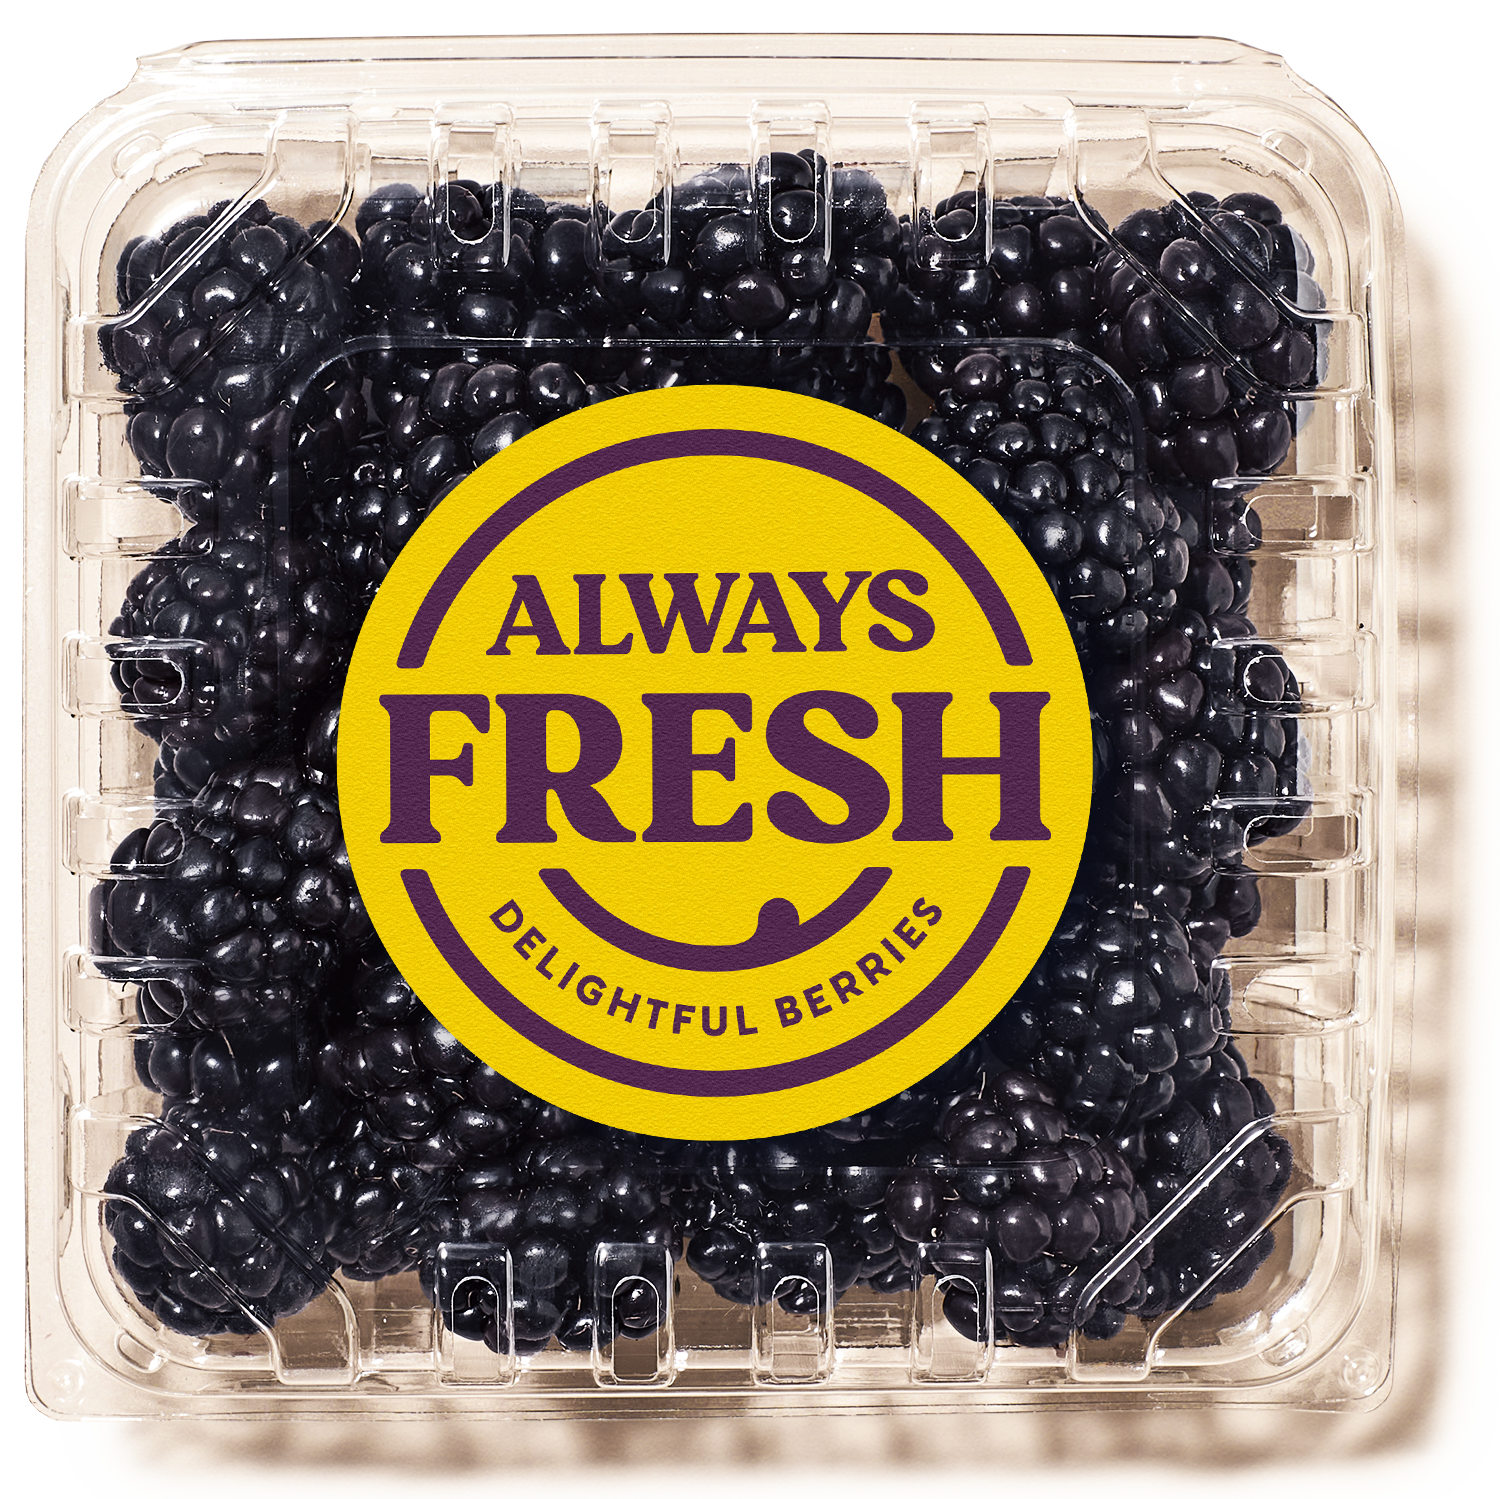 Image of Always Fresh blackberries in clear container